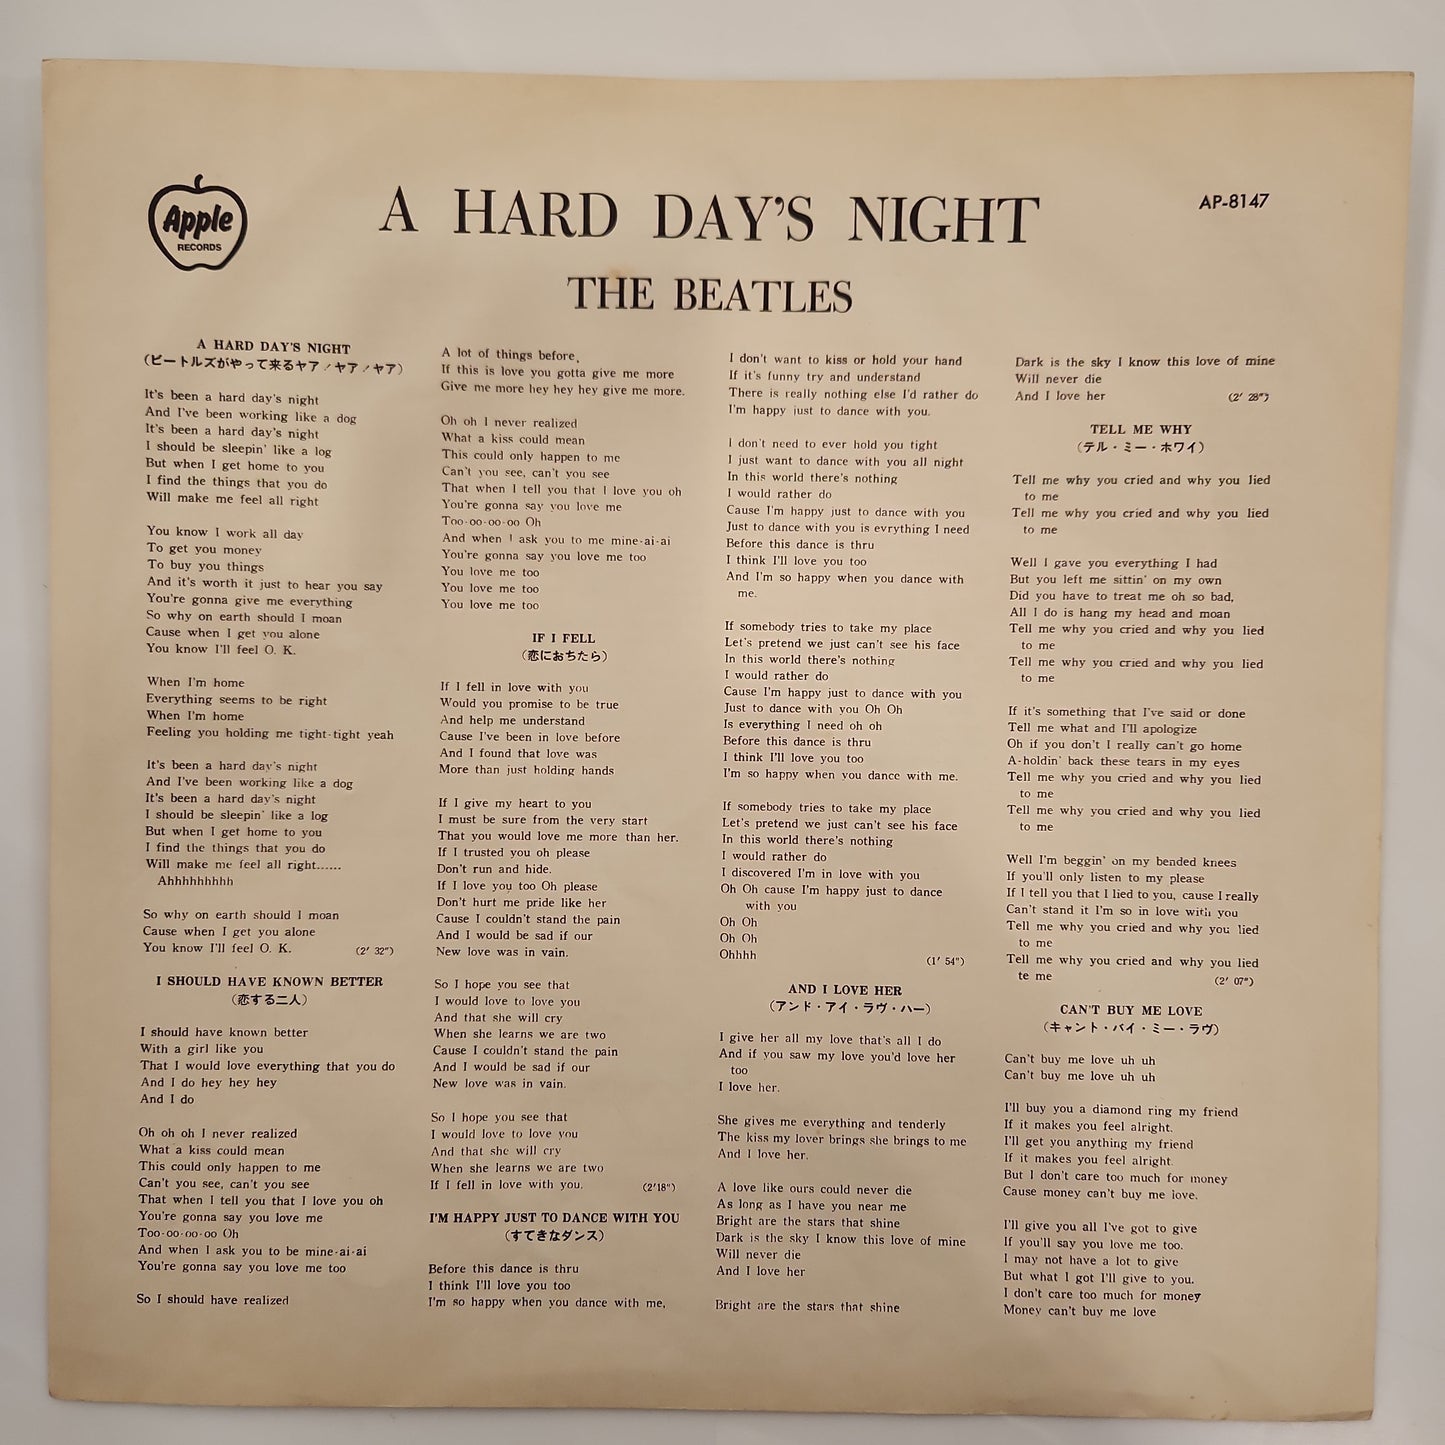 The Beatles - A Hard Day's Night (F42)